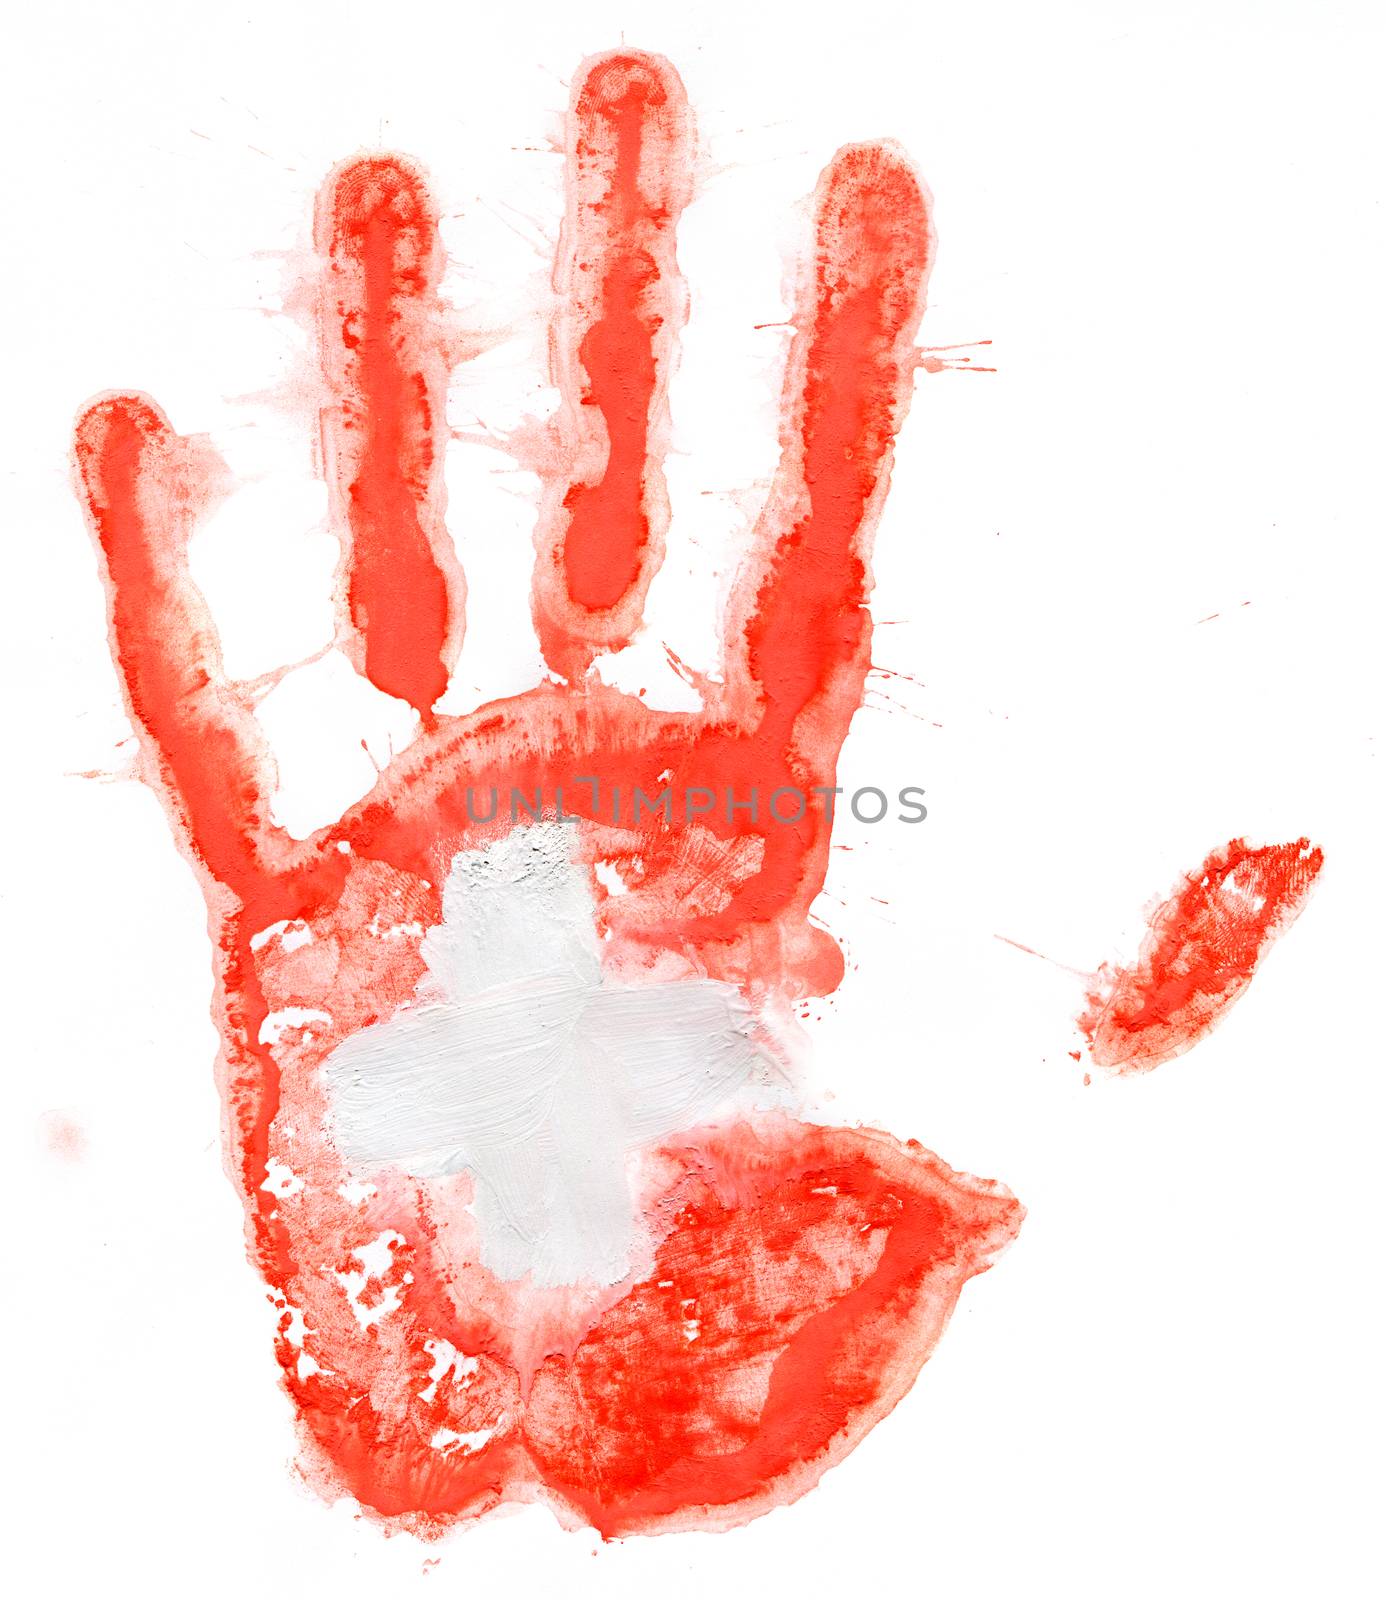 Handprint of a Swiss flag on a white by vlad_star